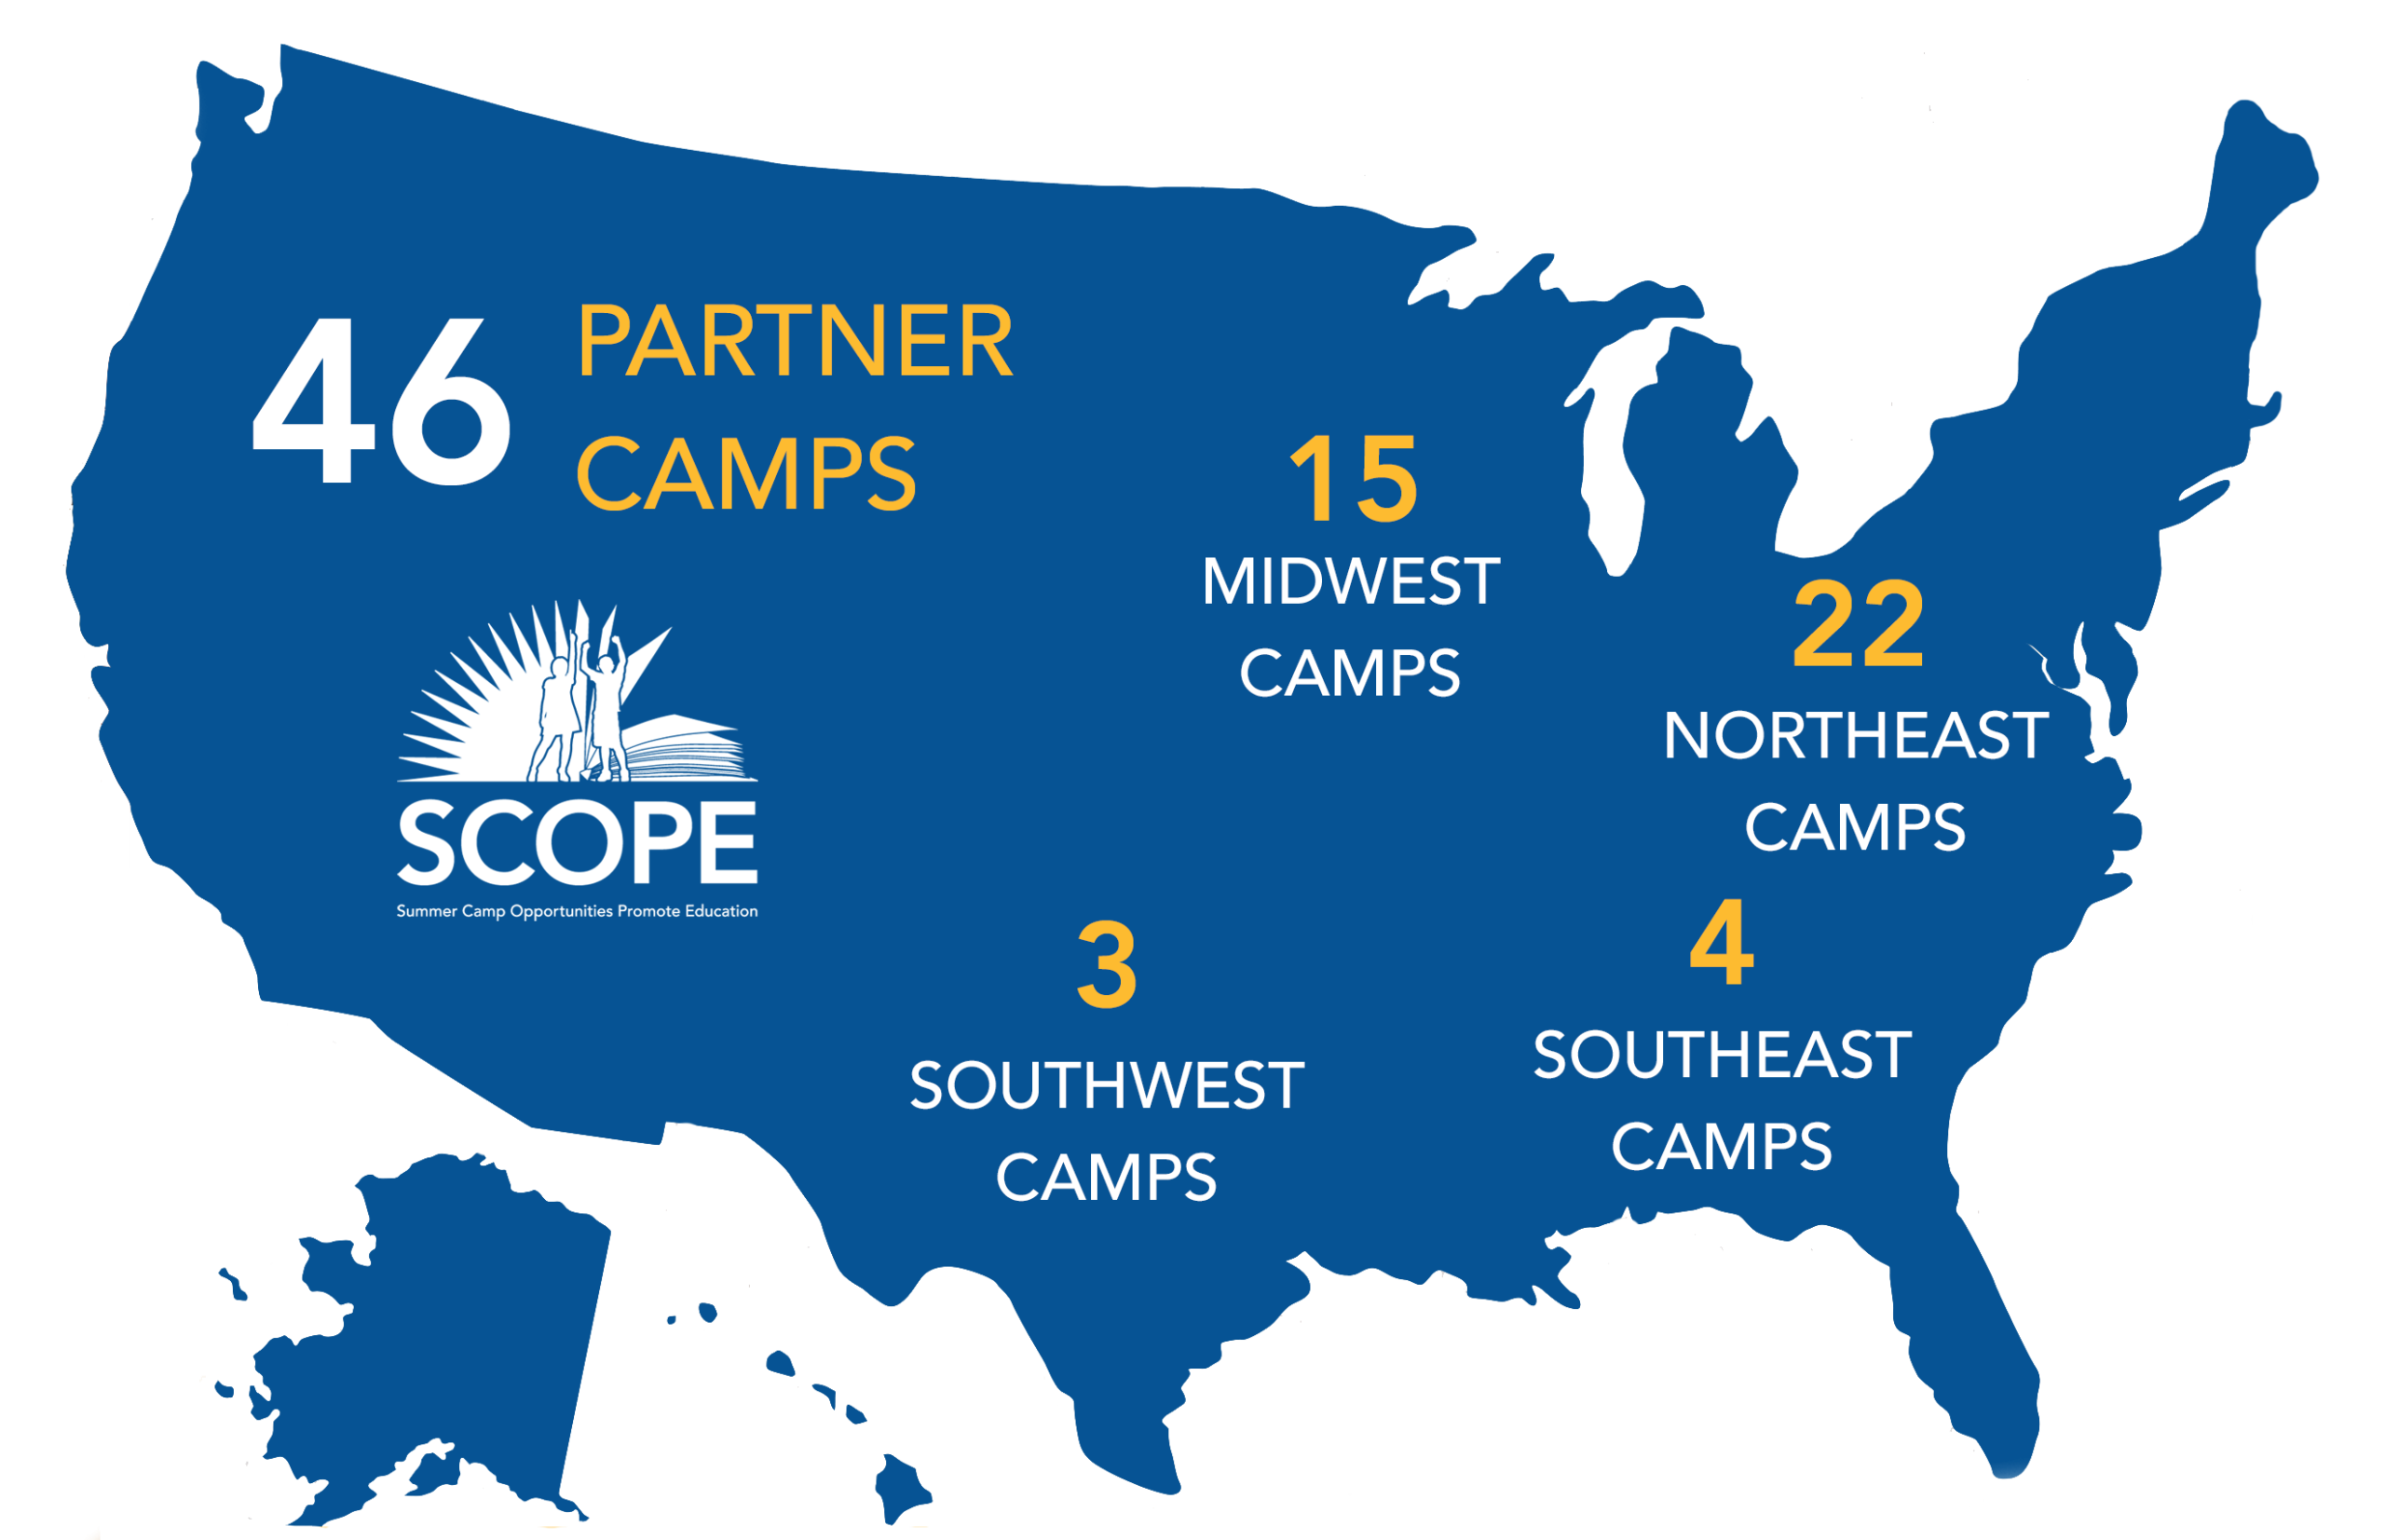 SCOPE Partner Camps USA Map